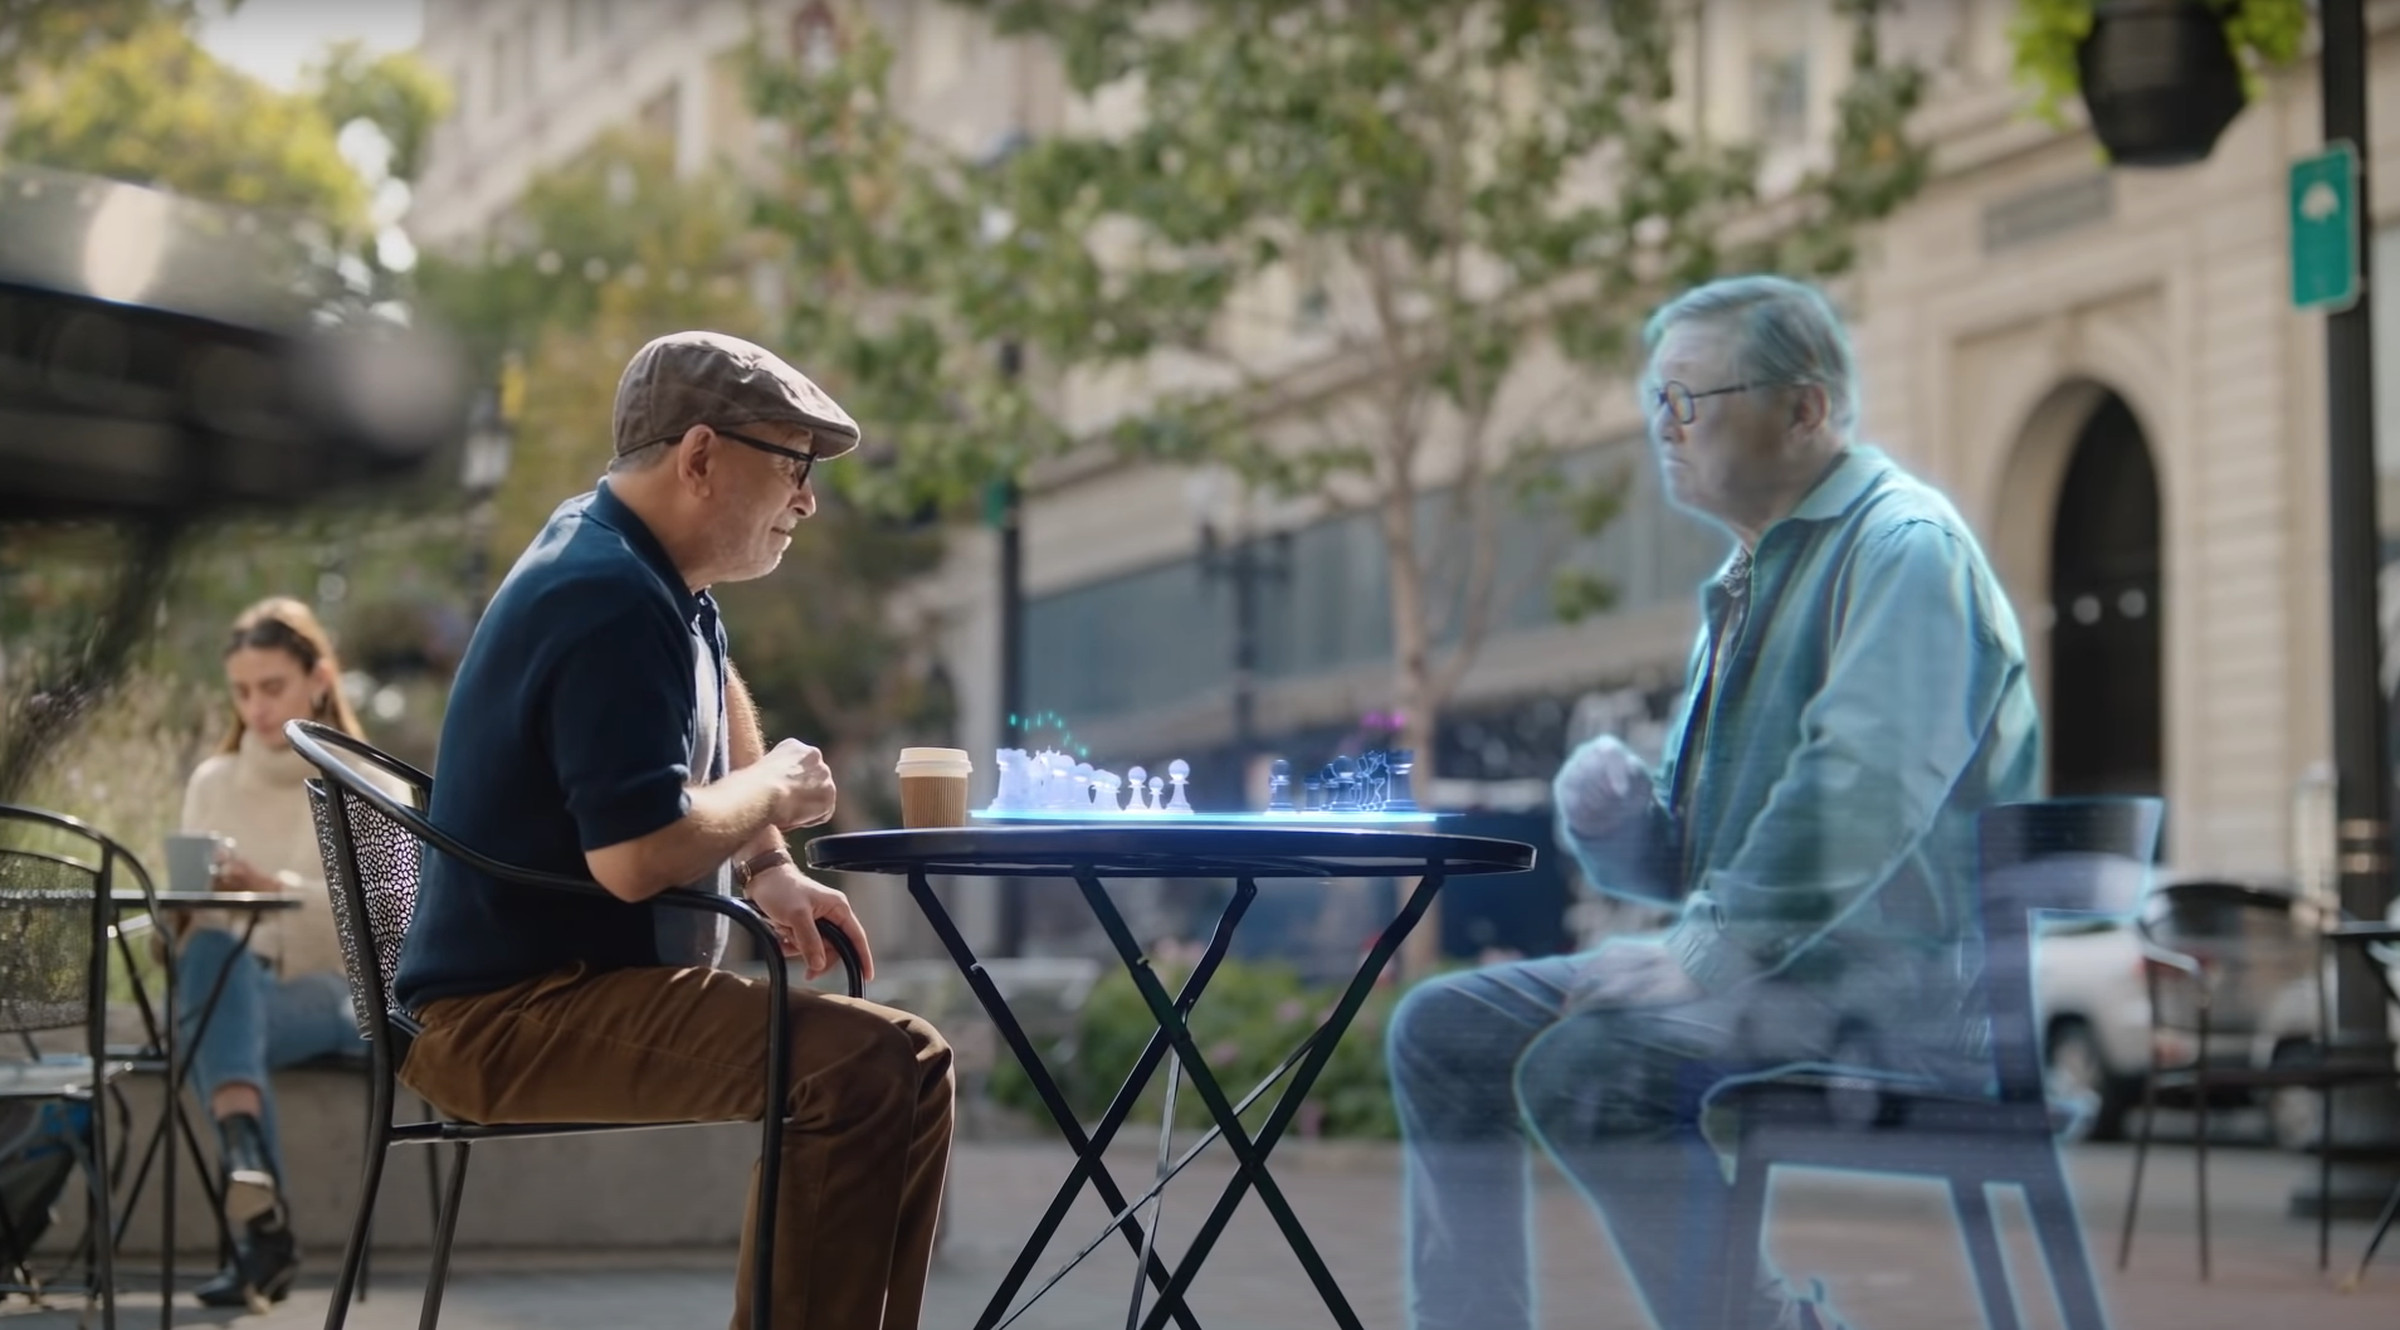 A demo illustrates how Meta imagines AR glasses could work to let someone play chess with a hologram.